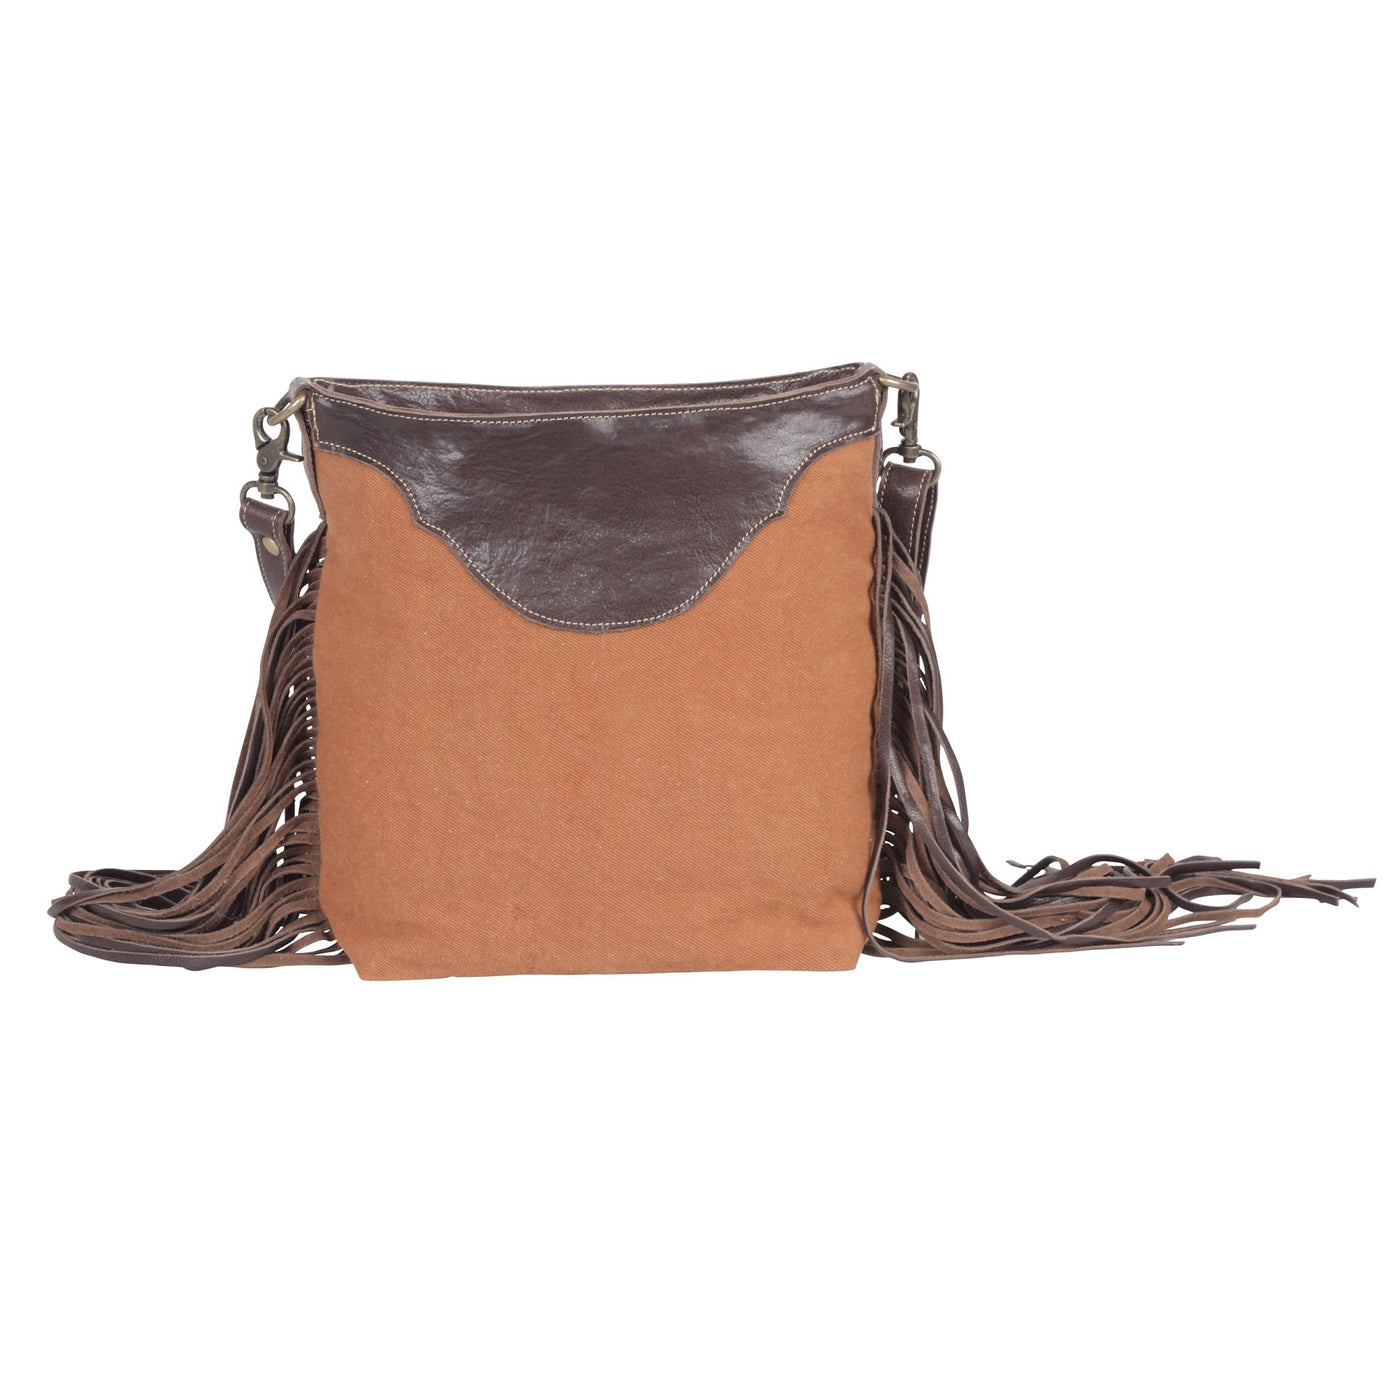 Western Recycled Canvas and Leather Crossbody Beautiful Tribal Print and Fringe